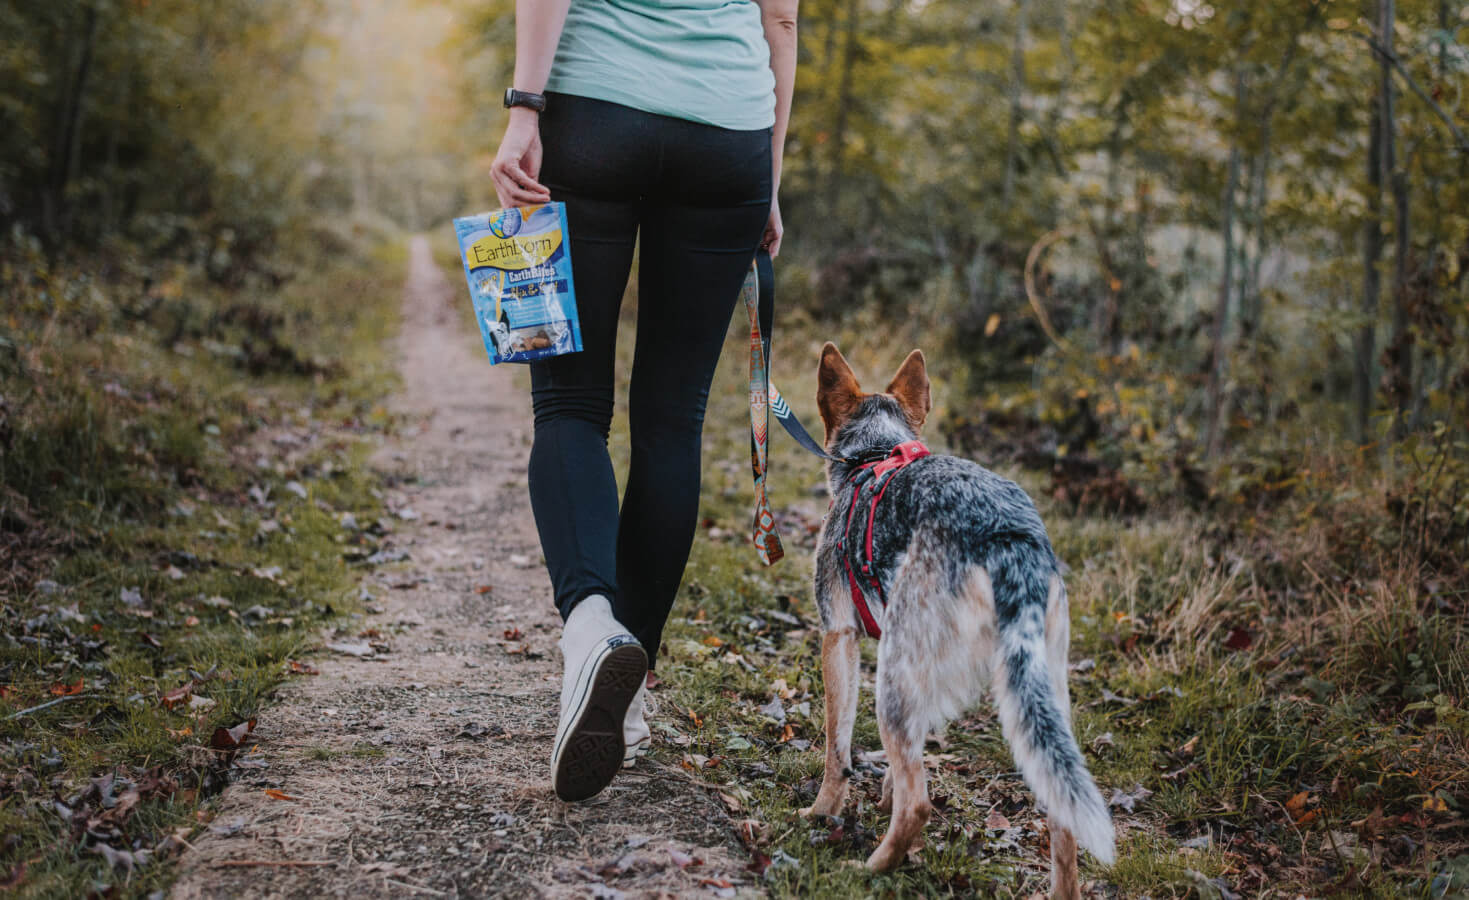 A woman walks her dog on a wooded trail with a bag of EarthBites dog treats in her hand